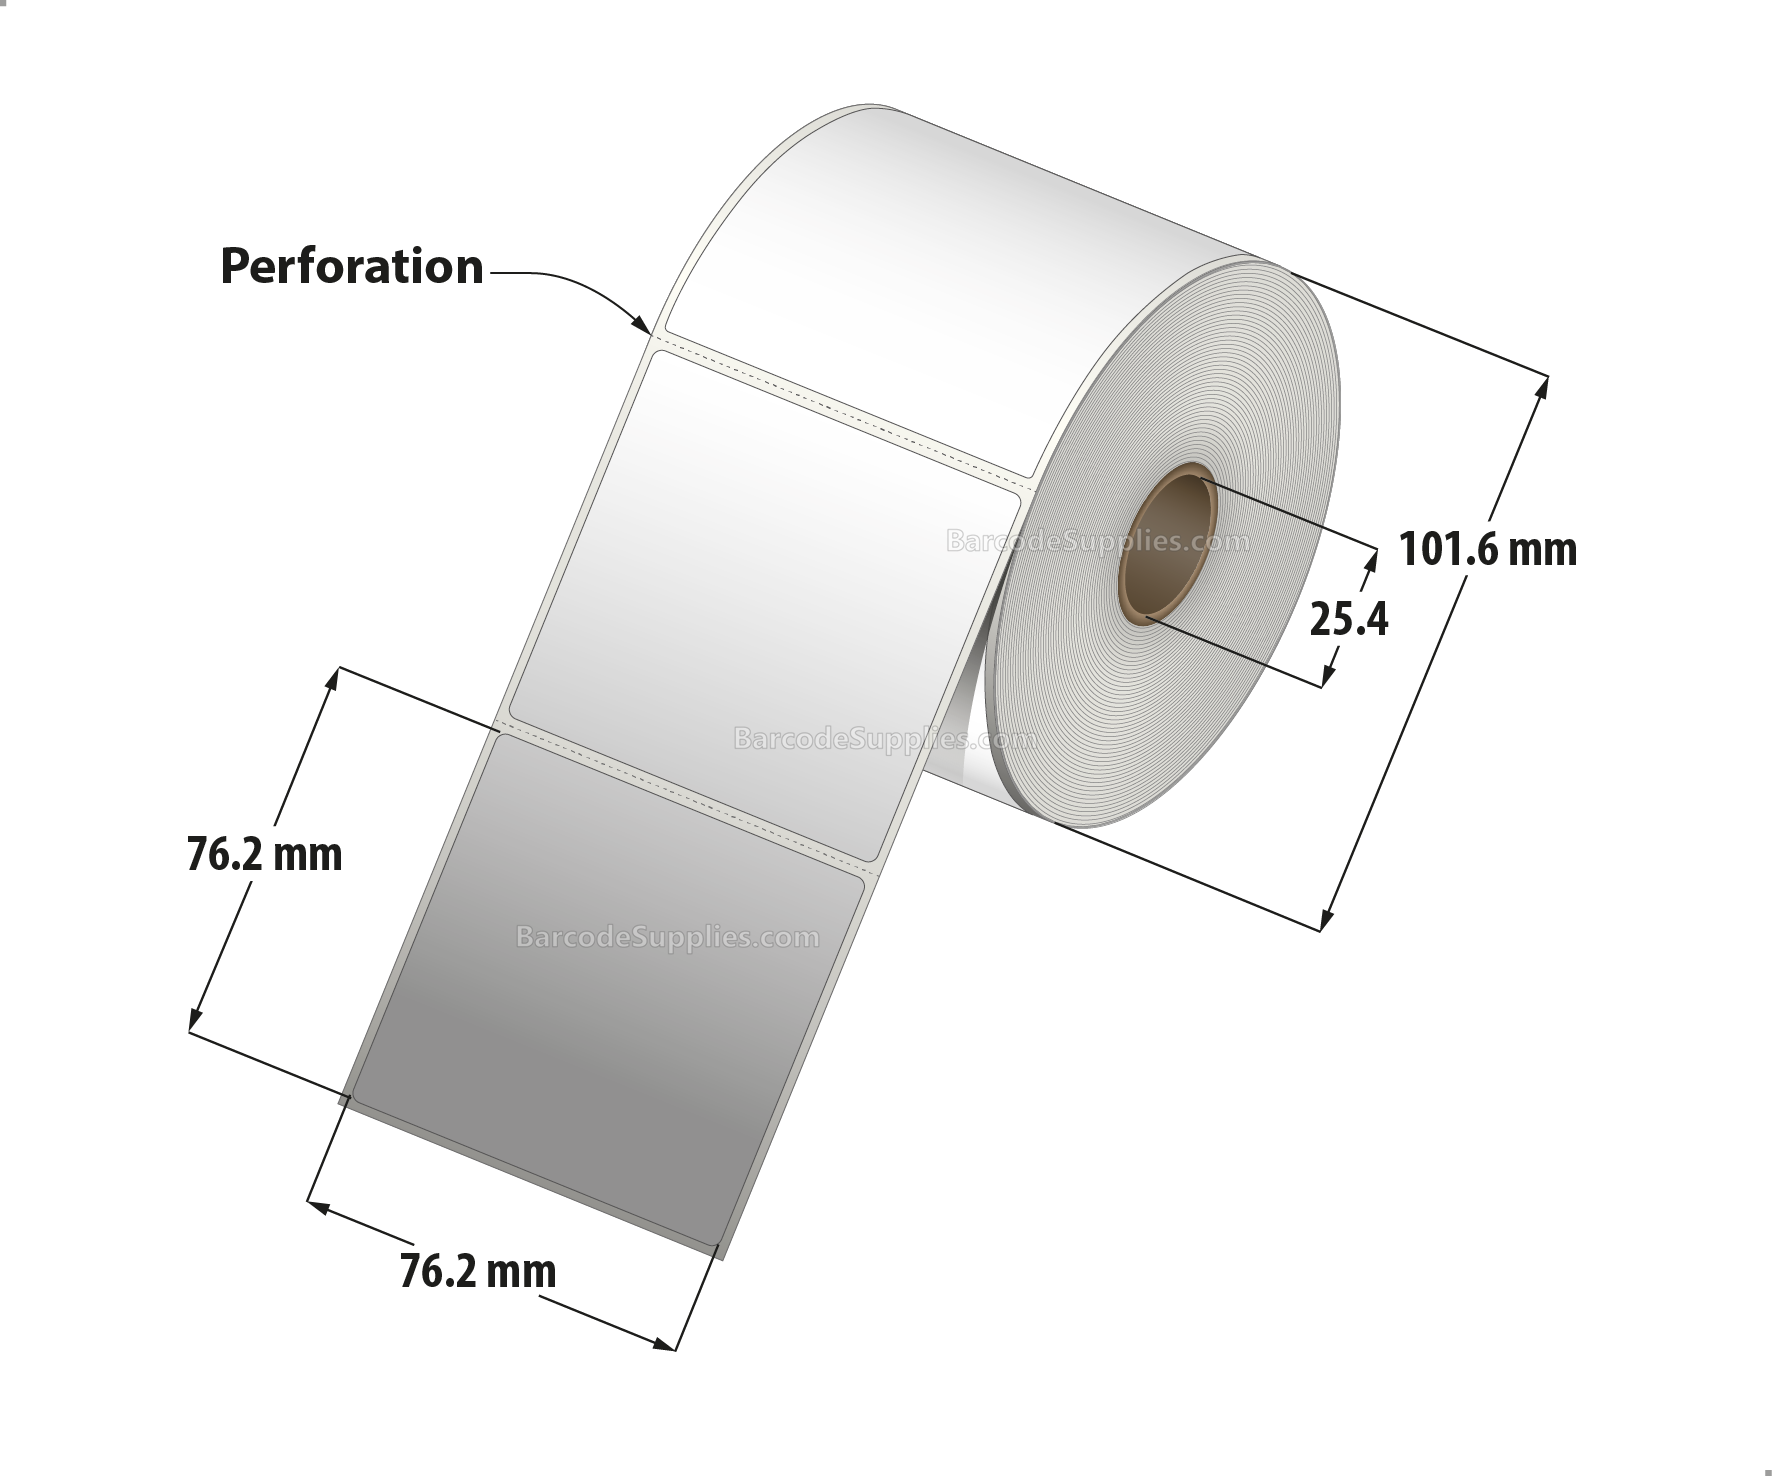 3 x 3 Thermal Transfer White Labels With Permanent Adhesive - Perforated - 500 Labels Per Roll - Carton Of 12 Rolls - 6000 Labels Total - MPN: RT-3-3-500-1